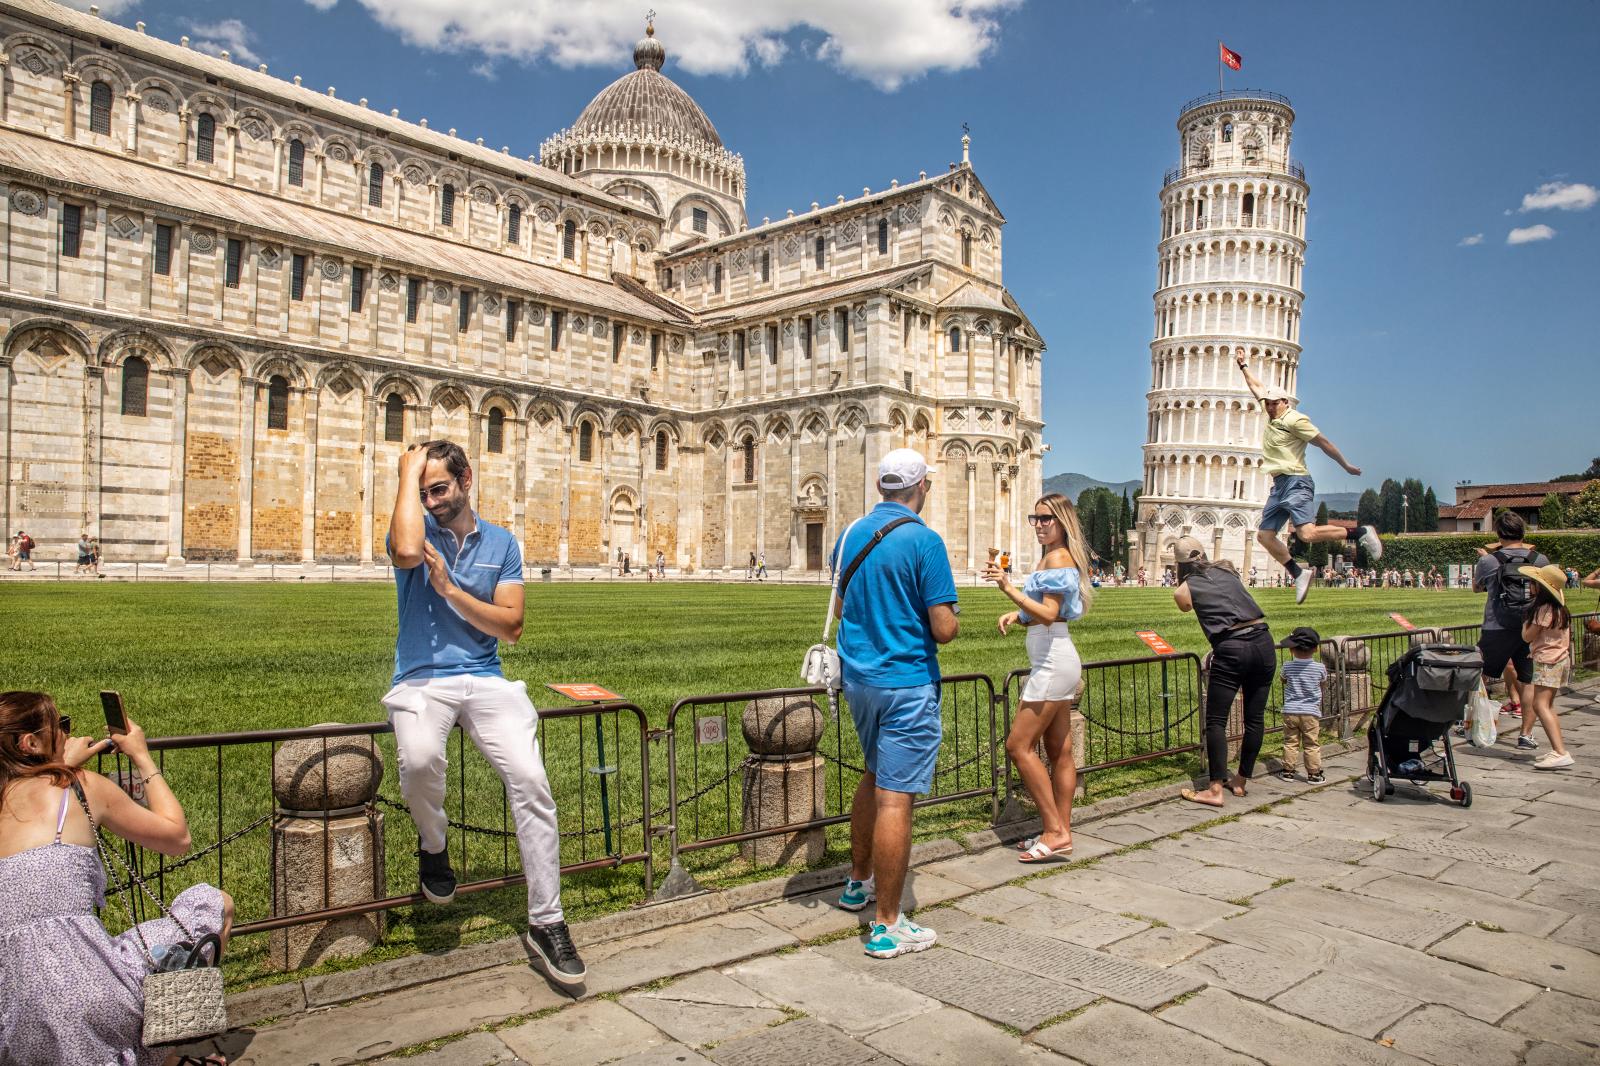 Selfies at The Leaning Tower of Pisa | Buy this image